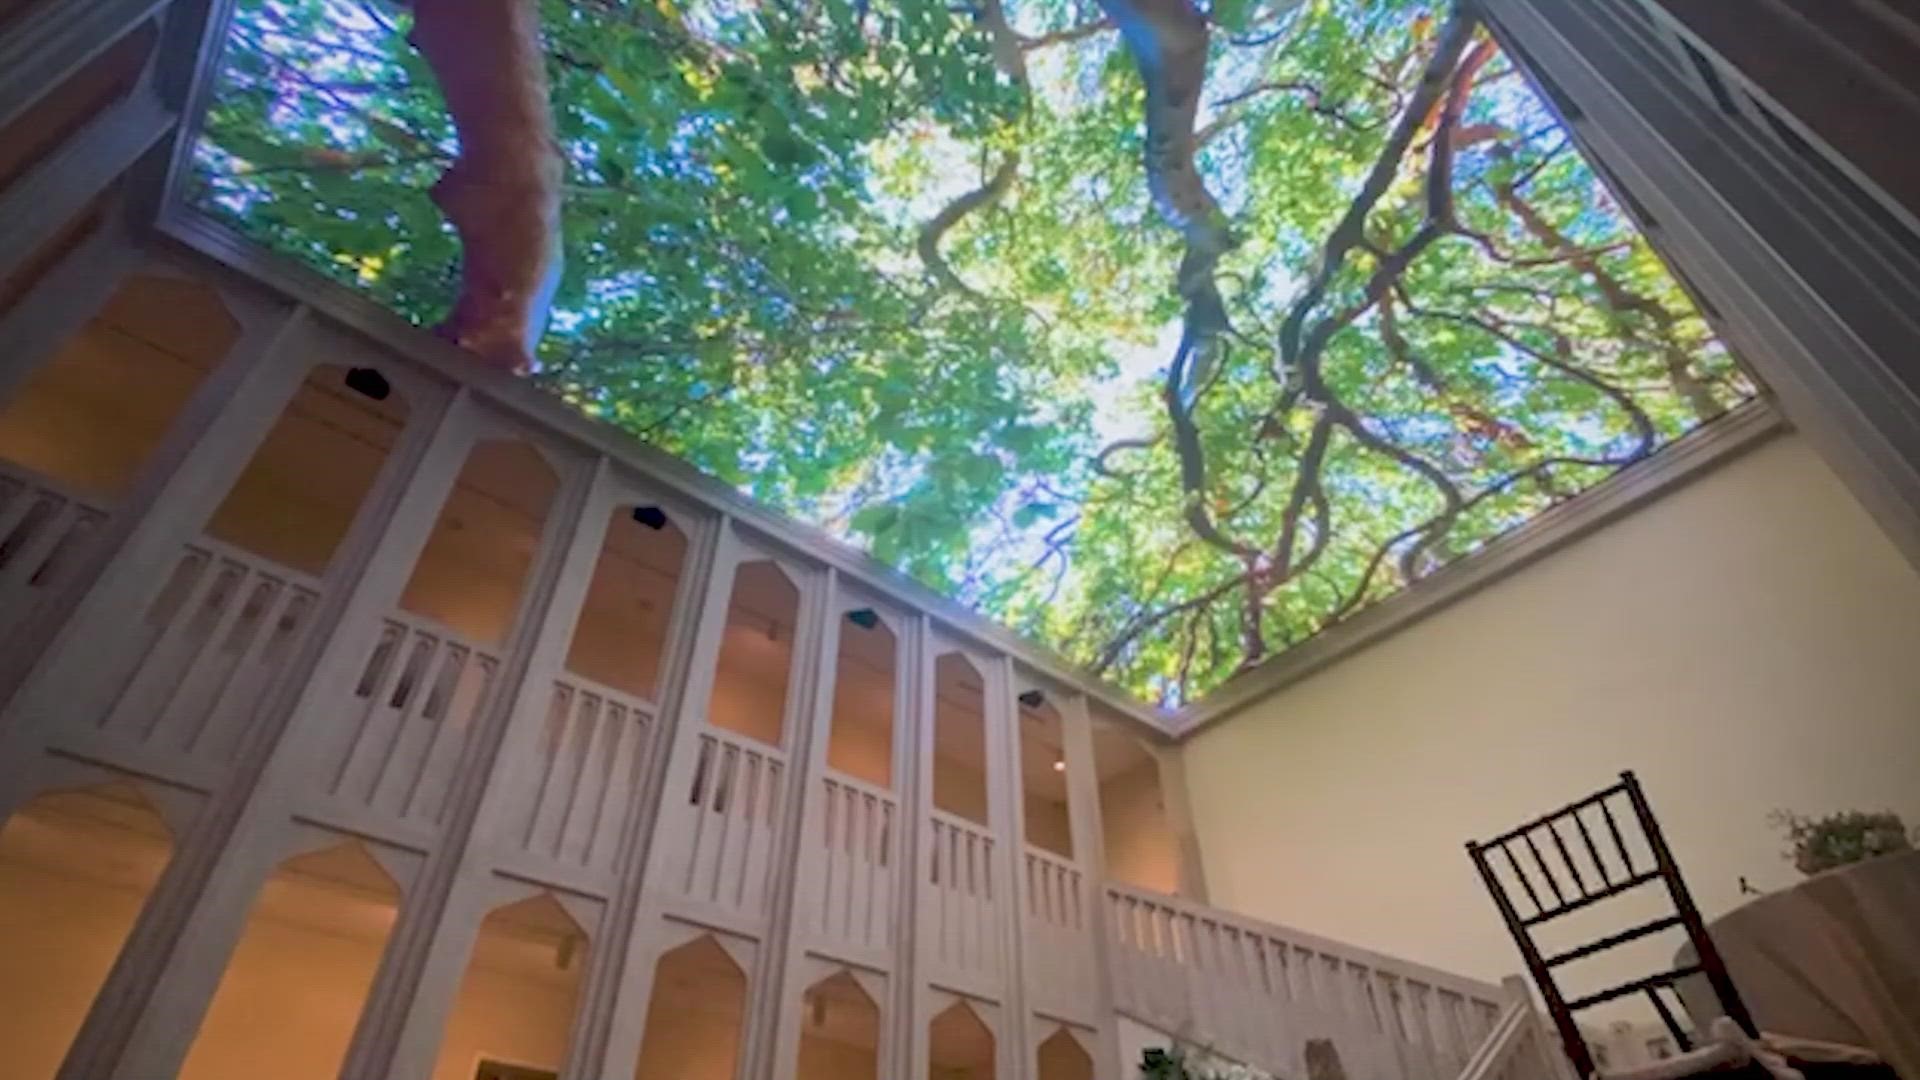 A timelapse shows scenes visitors could see inside the Indianapolis Museum of Art's courtyard.